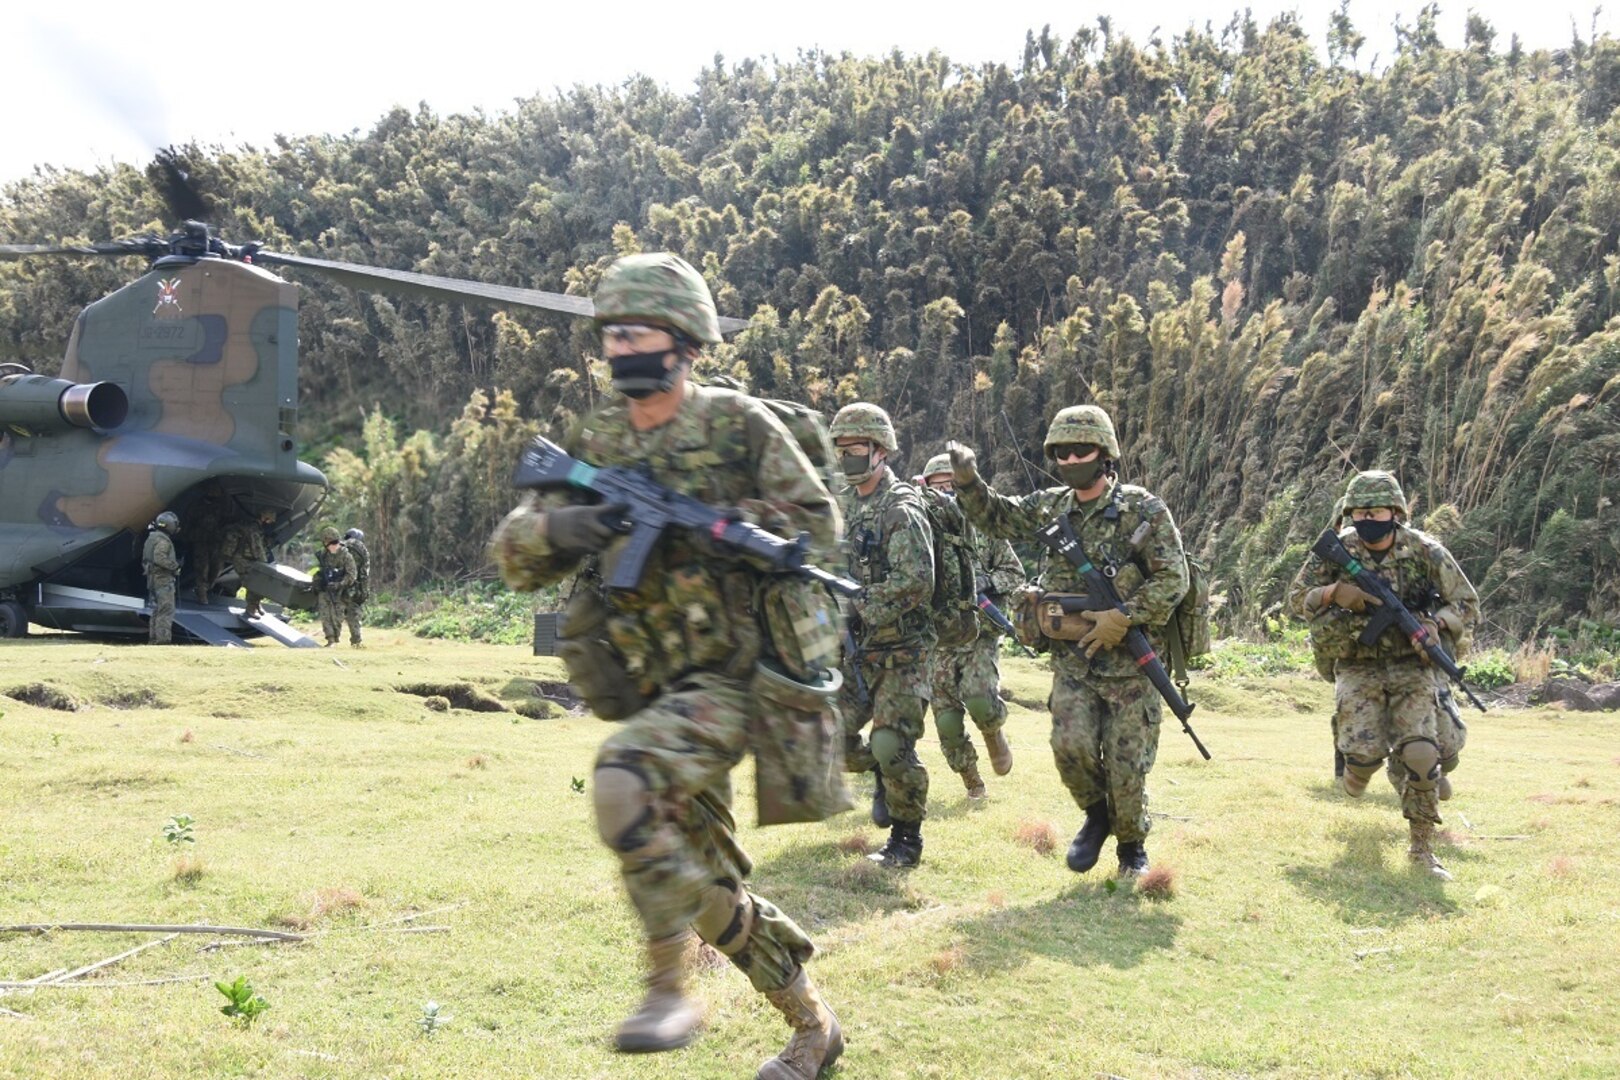 U.S. Marines teamed up with Japan’s Amphibious Rapid Deployment Brigade to conduct an amphibious assault on Gaja-Jima, a small uninhabited island off the coast of mainland Japan, as part of Keen Sword, Nov. 1, 2020.